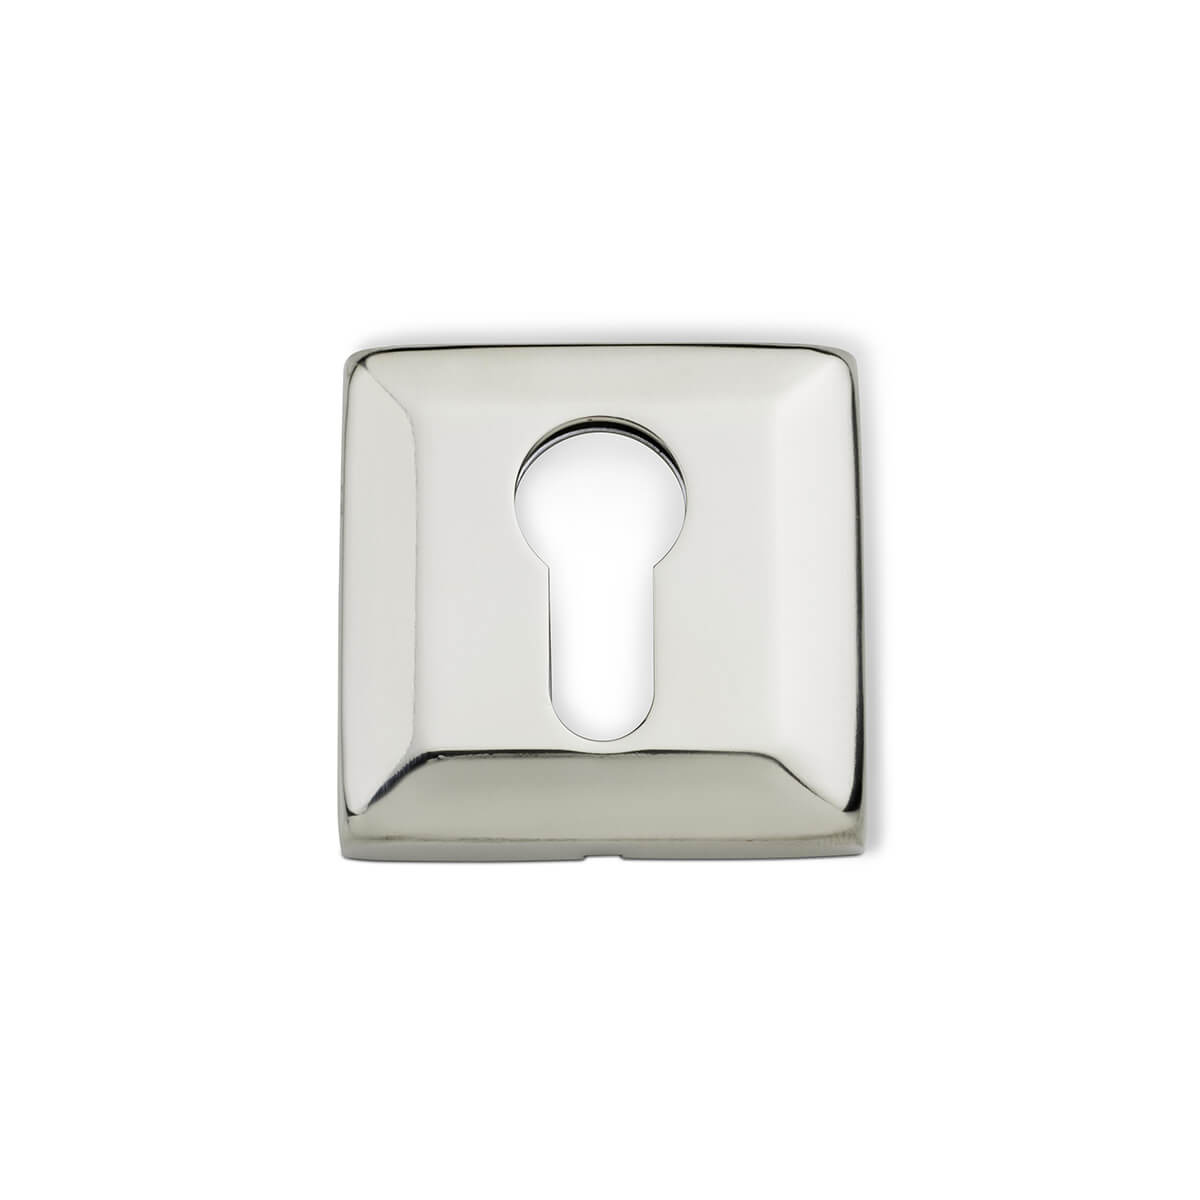 53mm Square Euro Escutcheon - Polished Stainless Steel